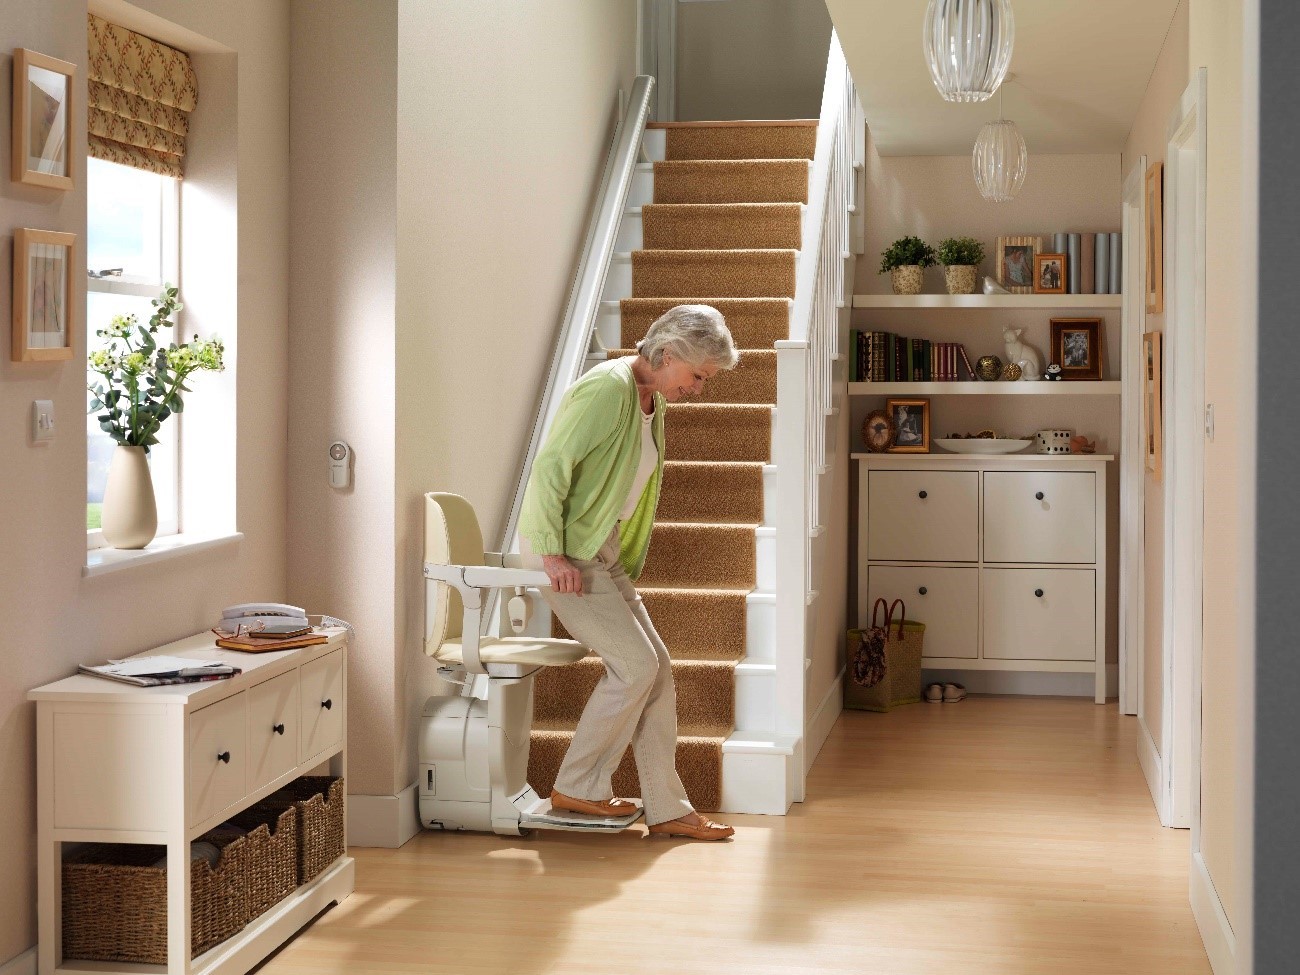 Stannah Stairlifts gives you control over your entire home 